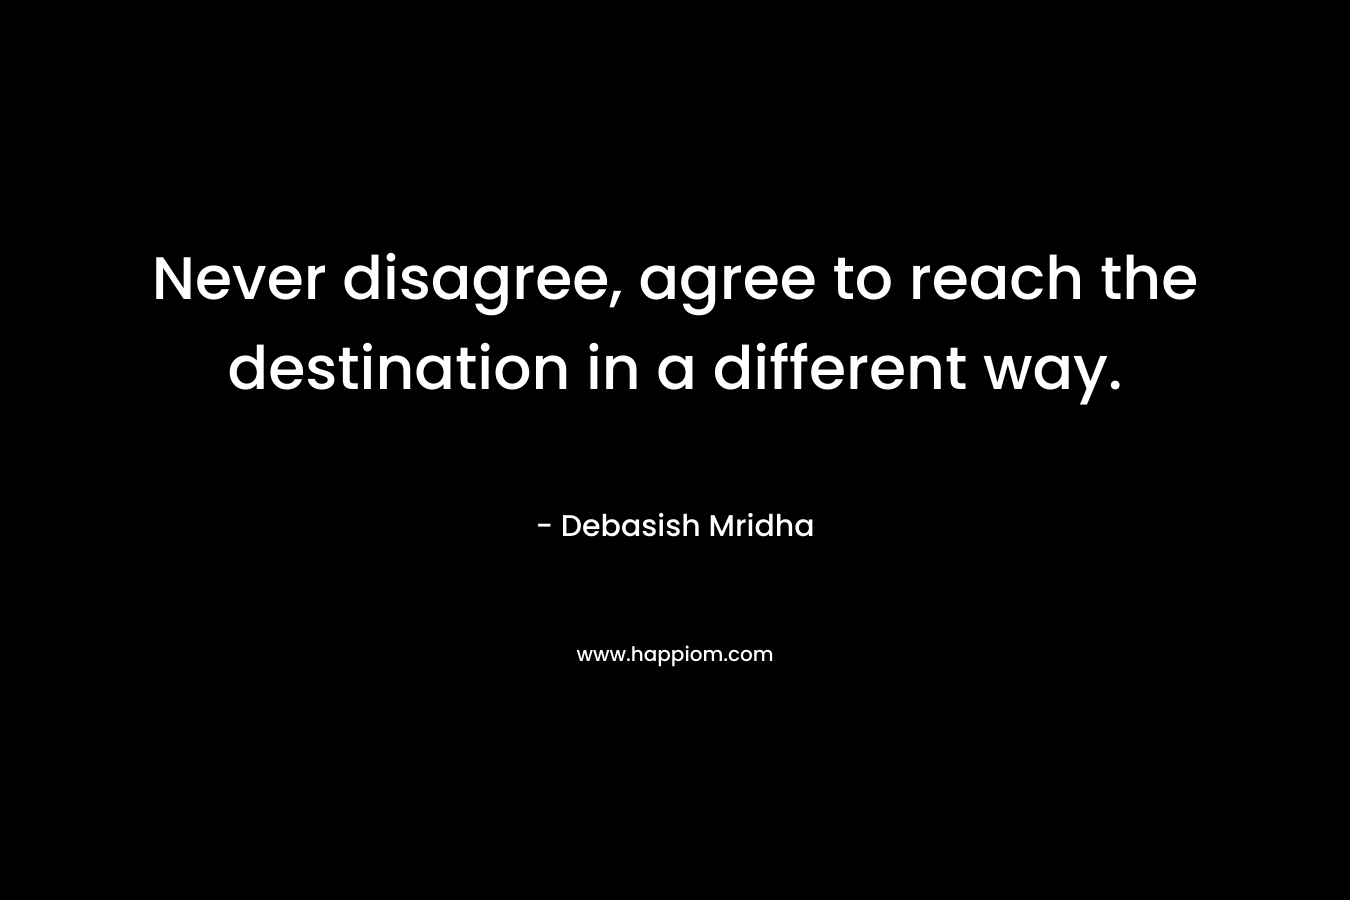 Never disagree, agree to reach the destination in a different way.